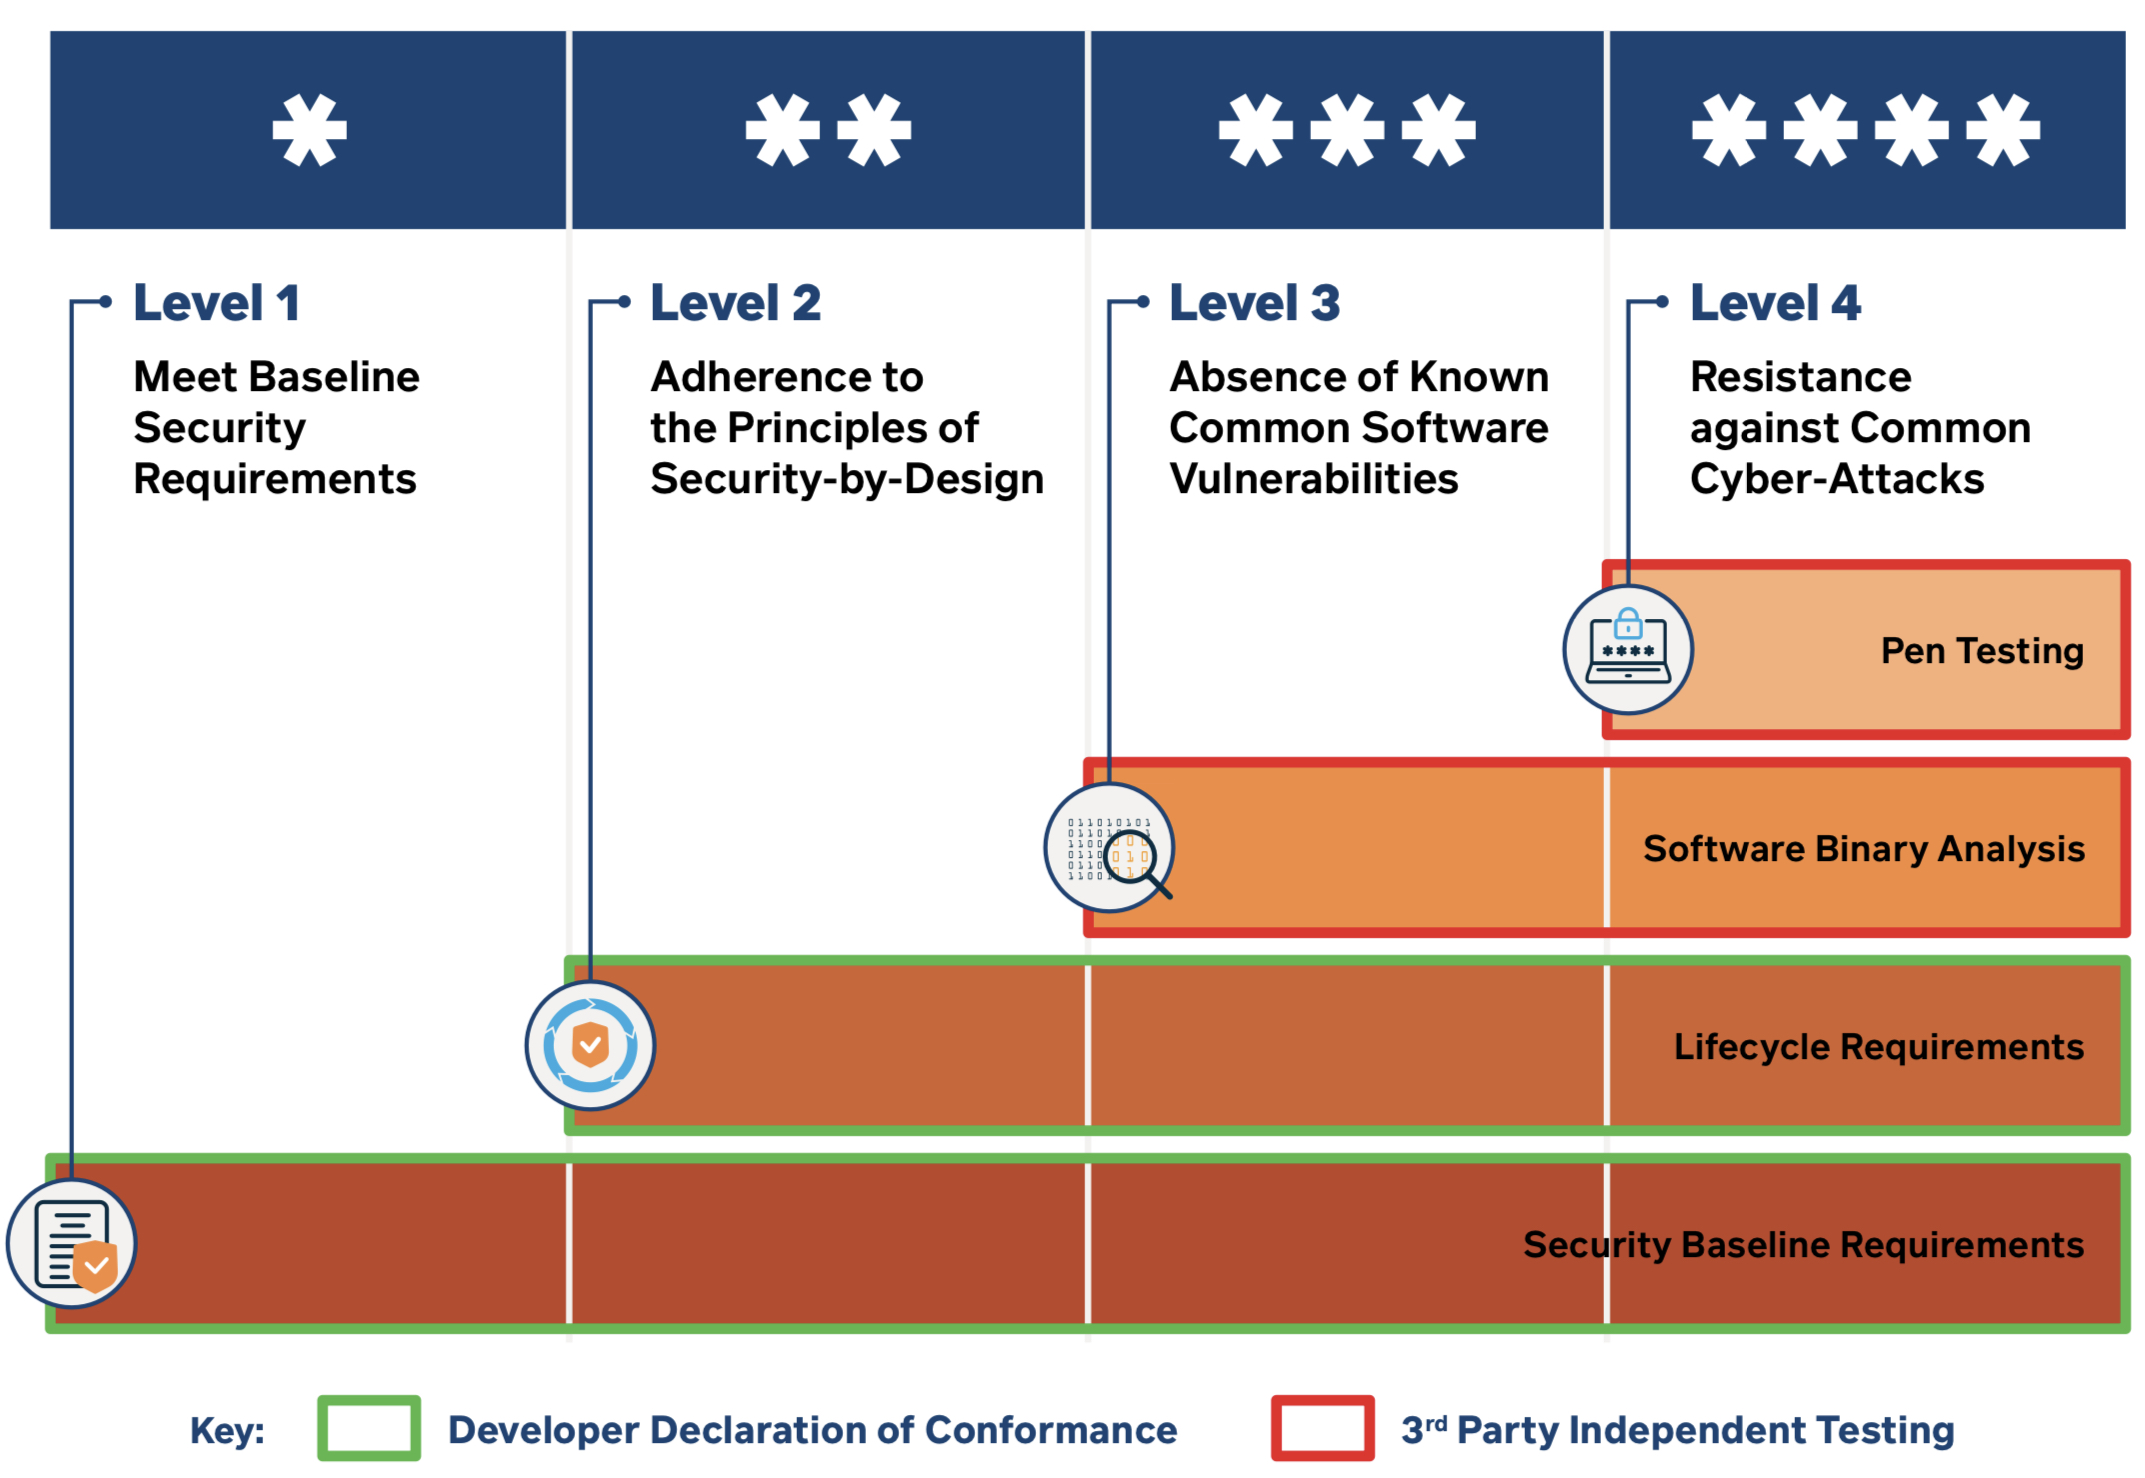 The Cybersecurity Labelling Scheme in Singapore, where consumer devices receive one of four scores based on security practices.